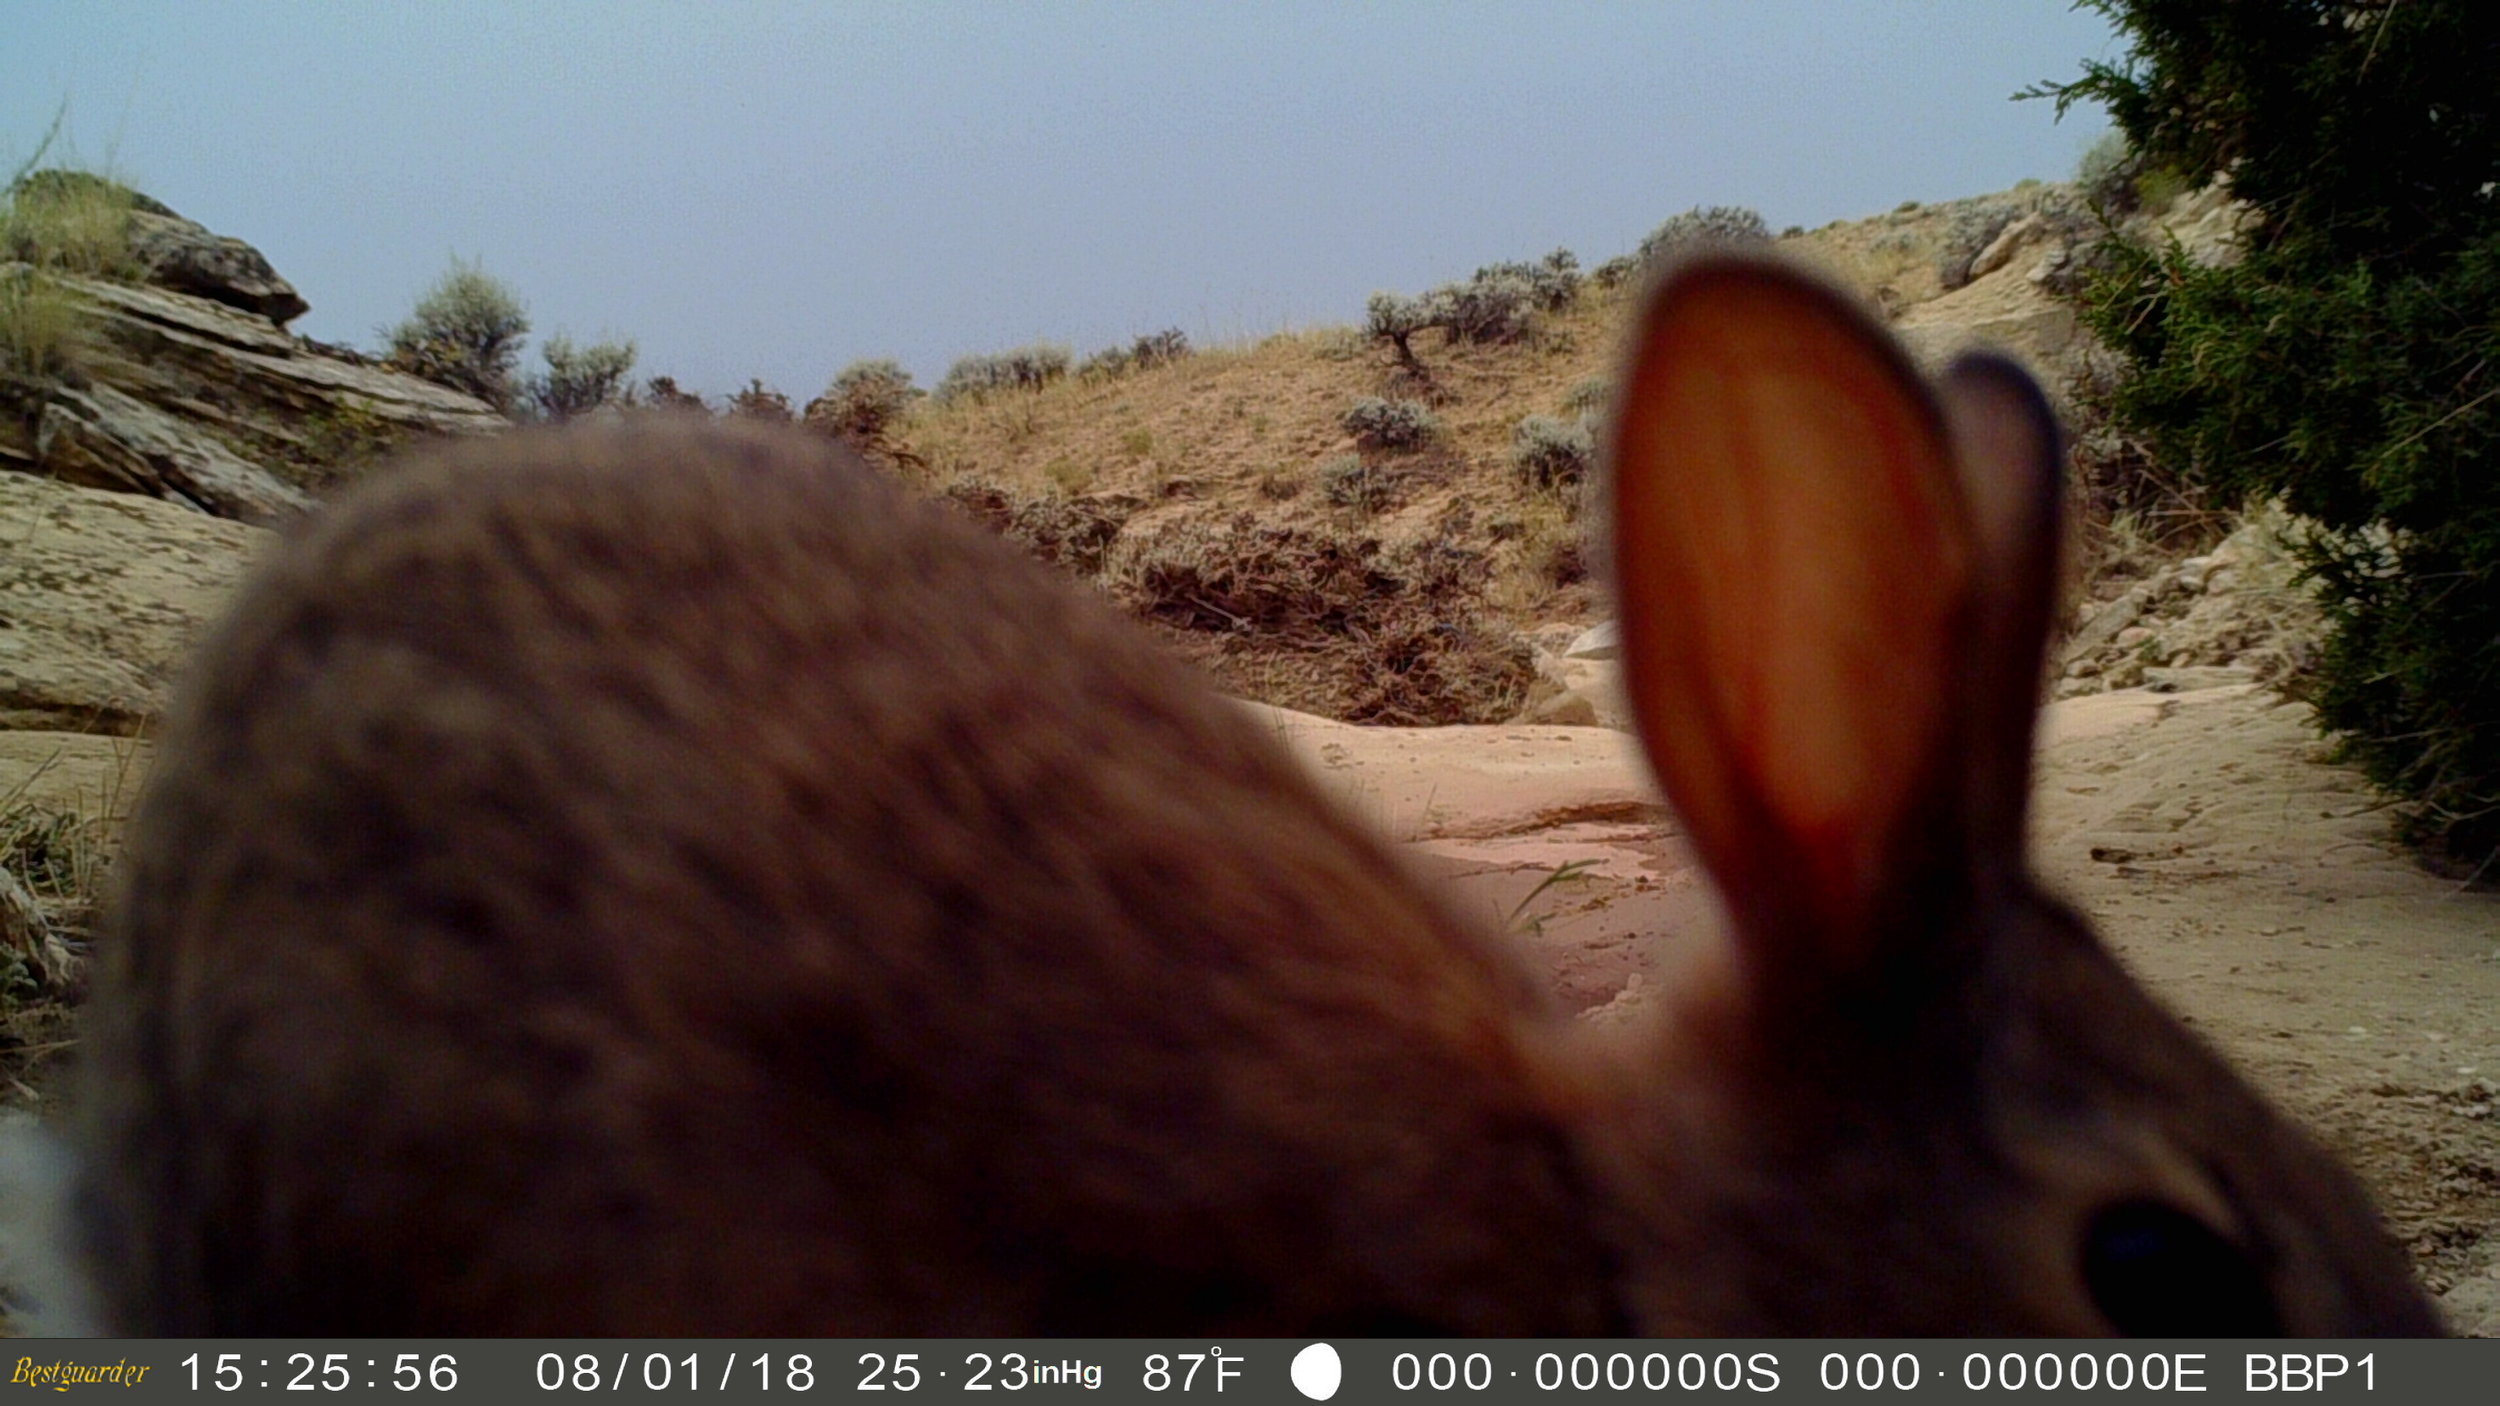 Image by BBPI Trail Cam